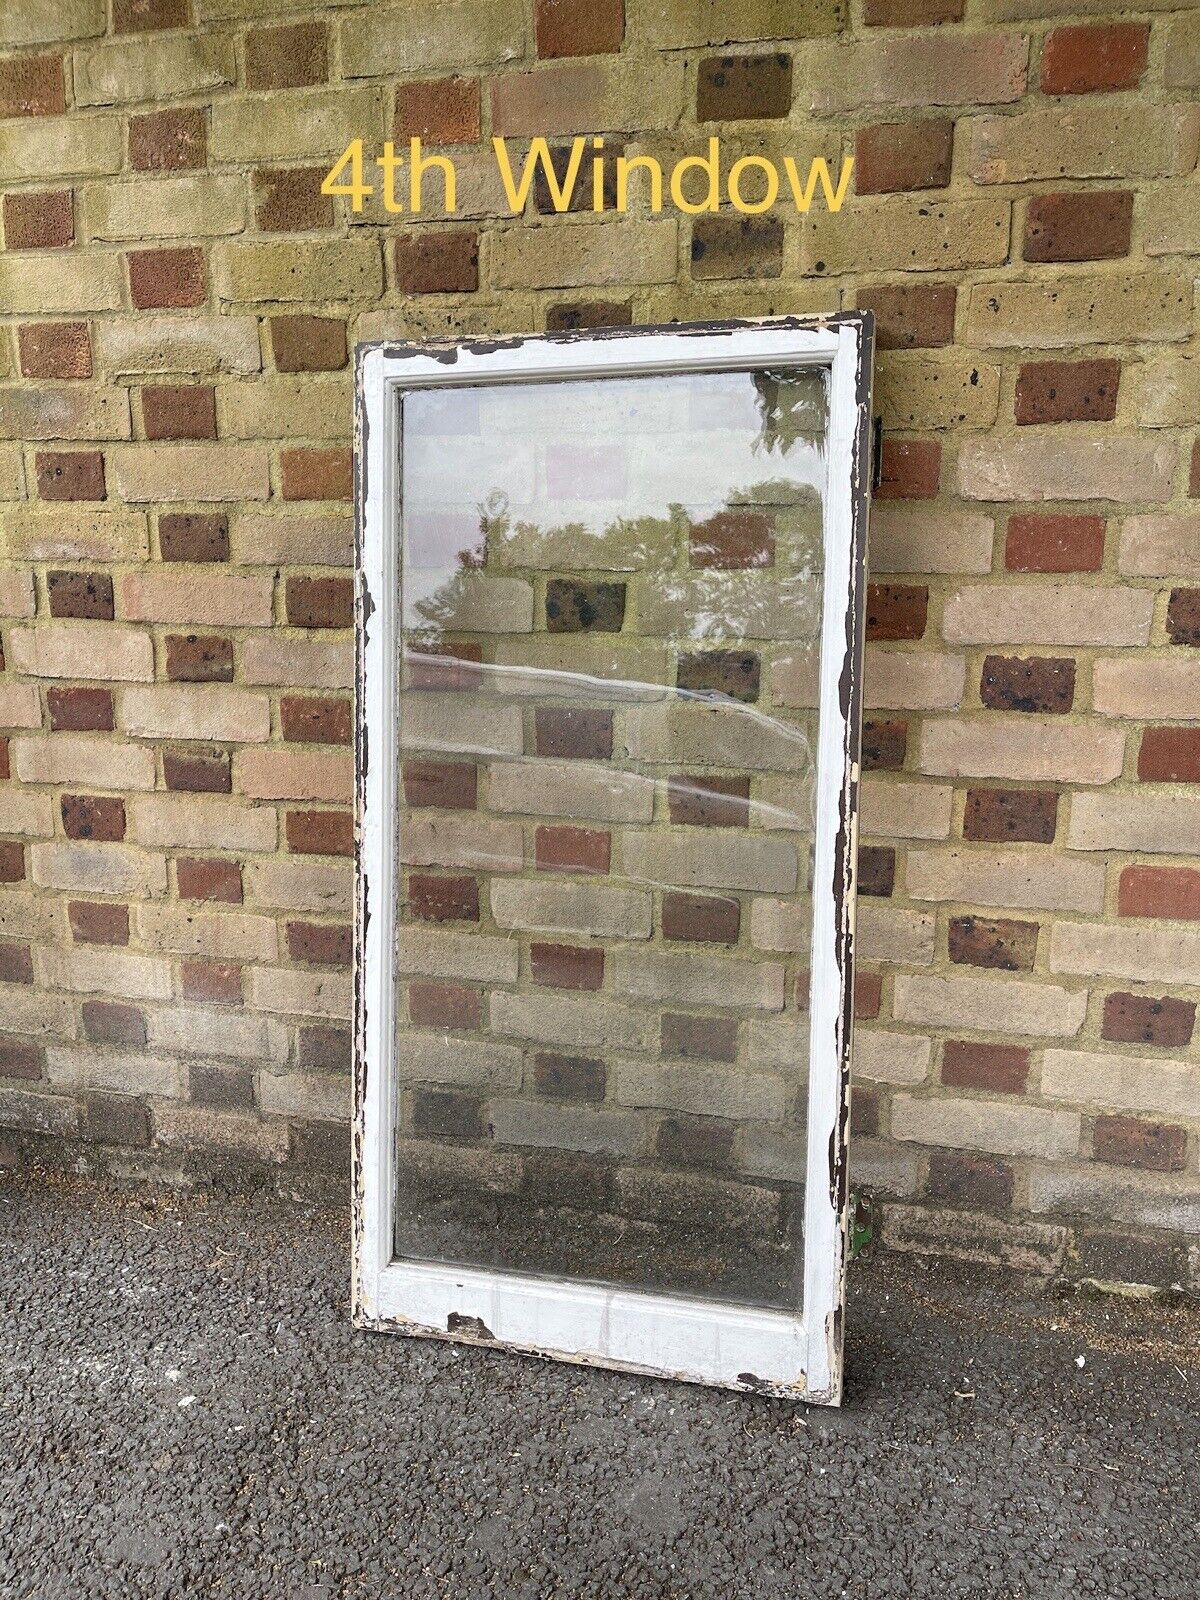 Job Lot Of Reclaimed Old Wooden Panel Sash Windows Cylinder Wavy Glass X 5